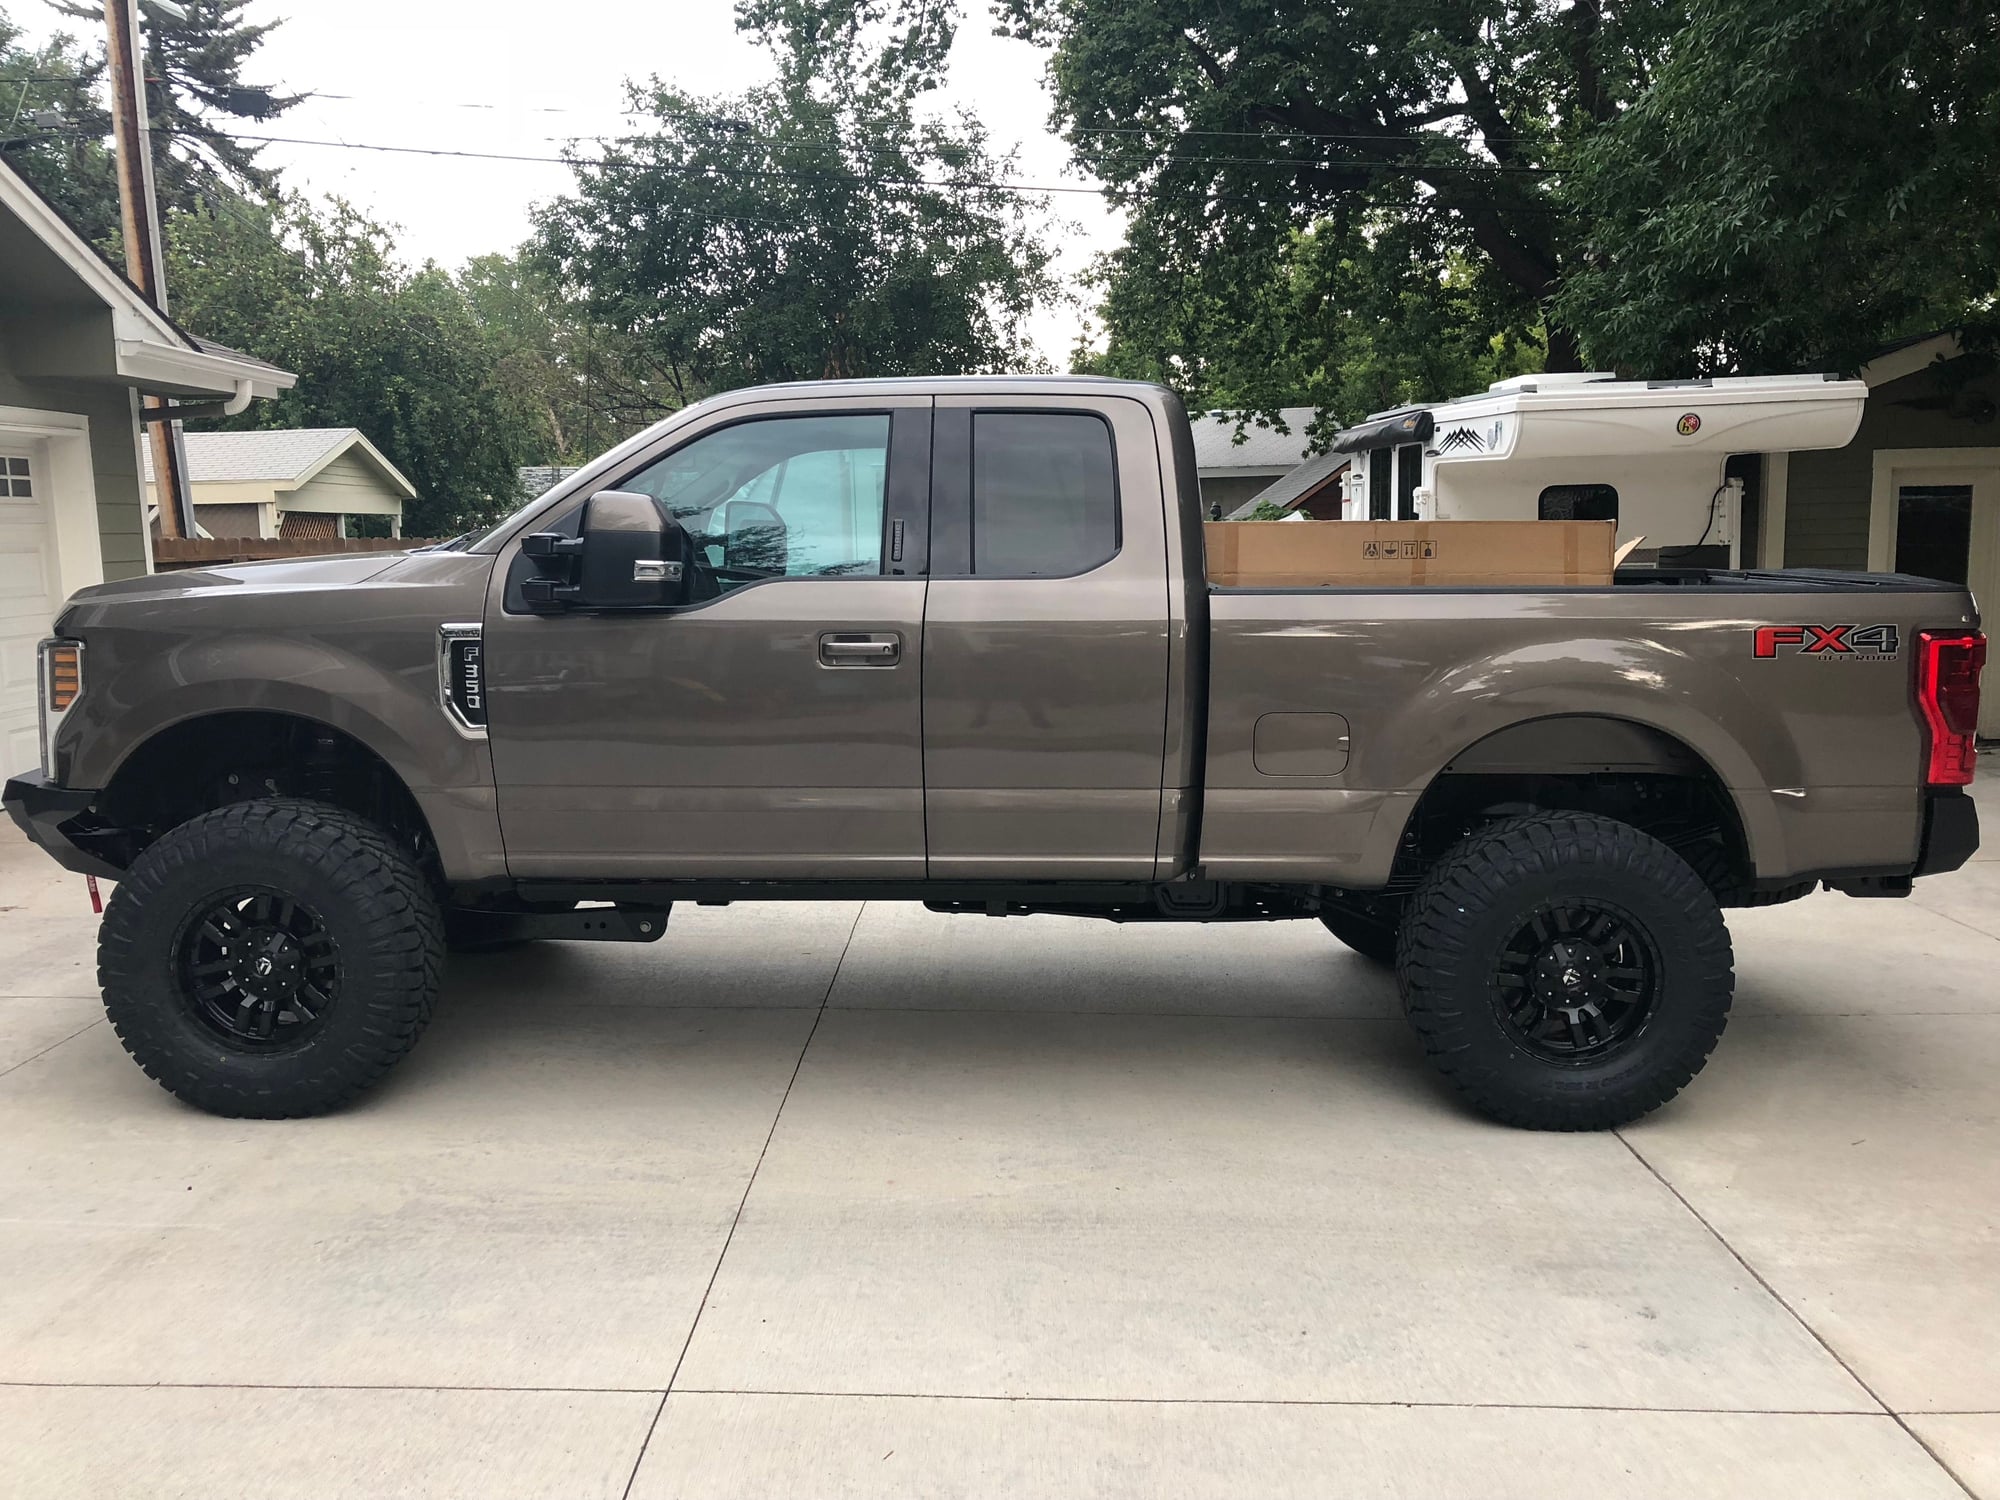 Pix of my new 2019 F-350 Lariat with 37's and ADD bumpers - Ford 